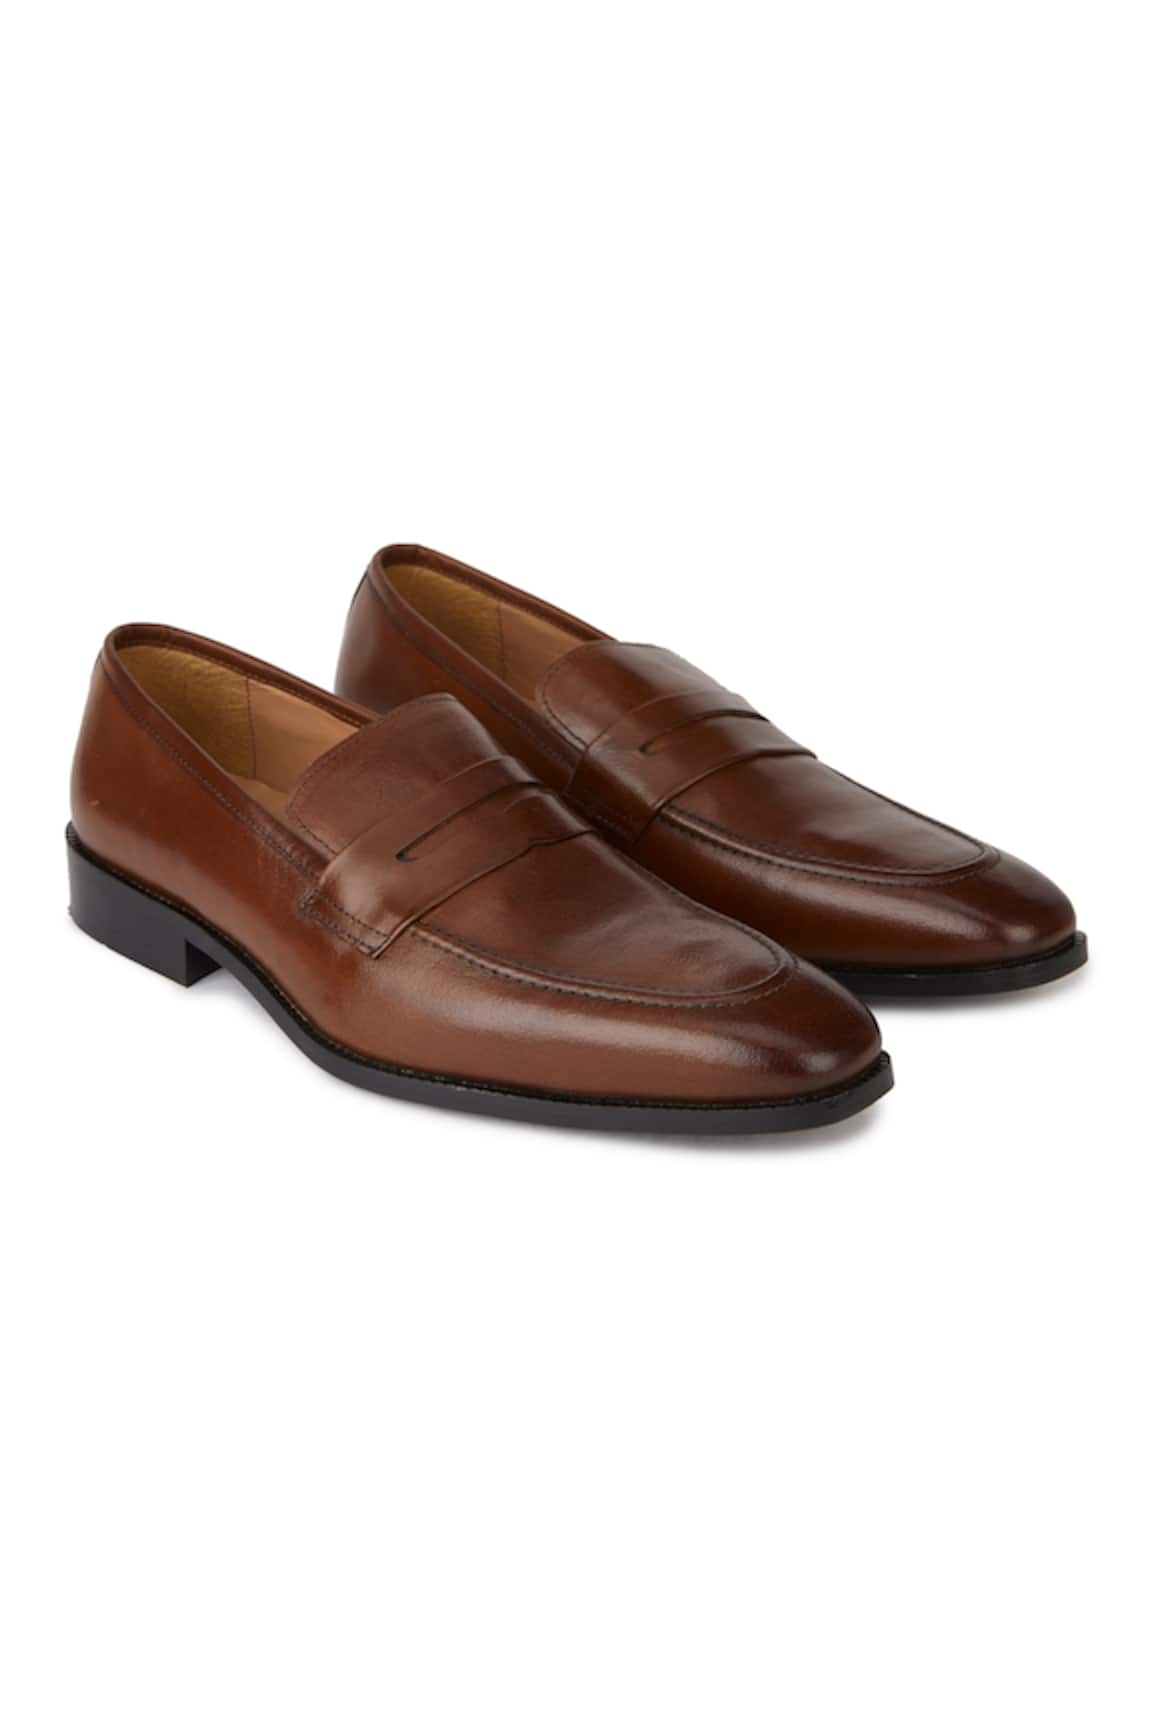 Hats Off Accessories Genuine Leather Slip On Penny Loafers